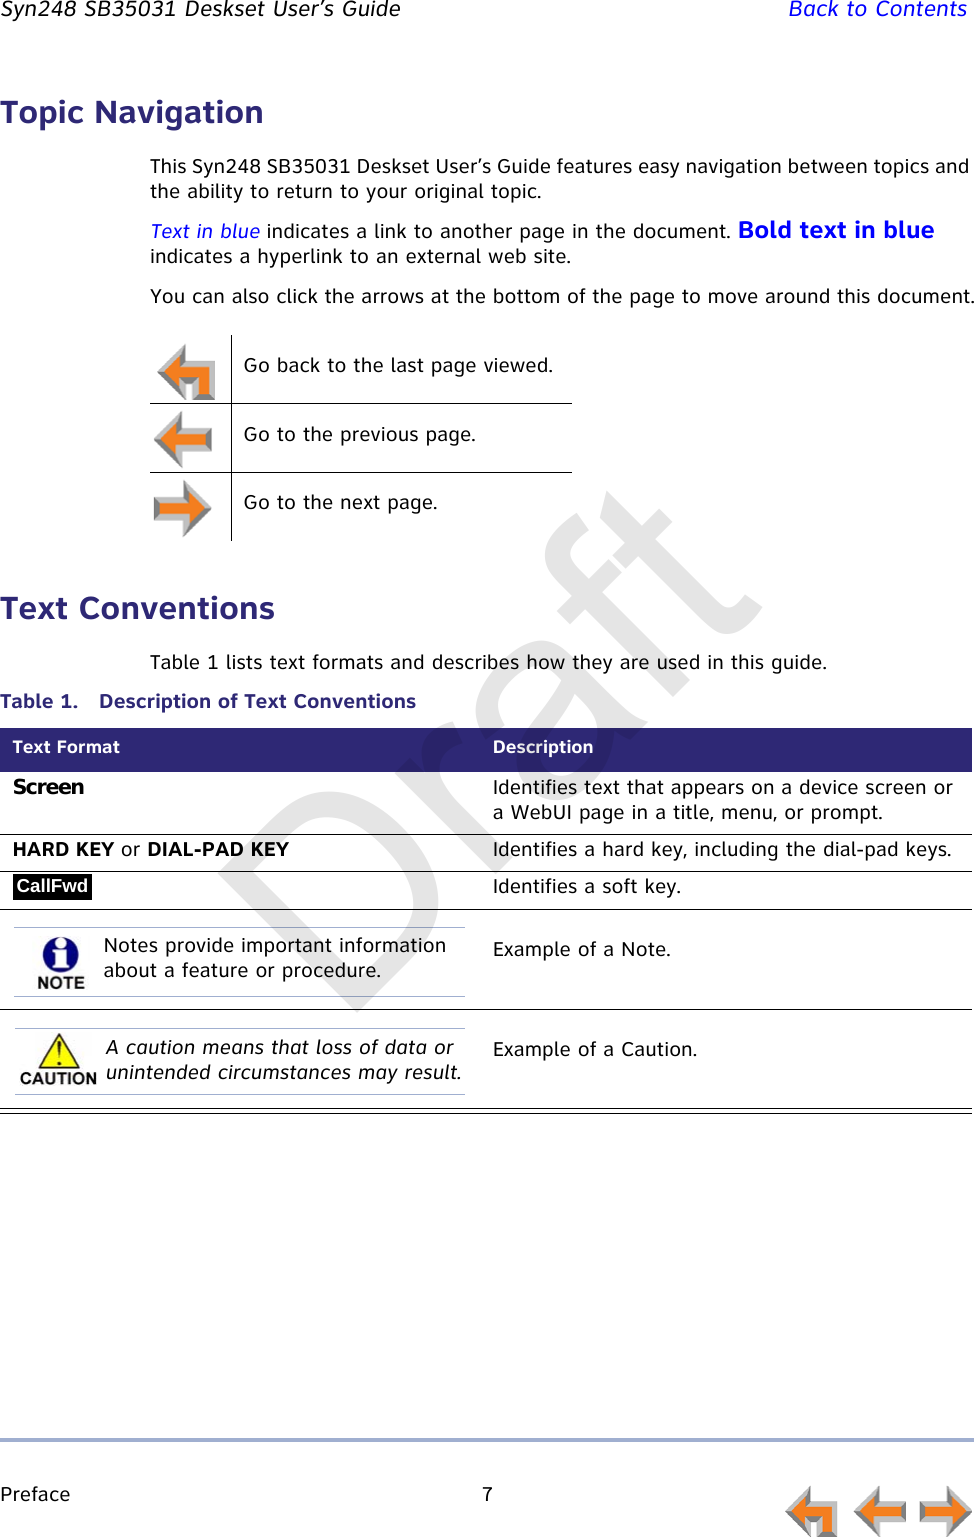 Preface 7         Syn248 SB35031 Deskset User’s Guide Back to ContentsTopic NavigationThis Syn248 SB35031 Deskset User’s Guide features easy navigation between topics and the ability to return to your original topic.Text in blue indicates a link to another page in the document. Bold text in blue indicates a hyperlink to an external web site.You can also click the arrows at the bottom of the page to move around this document.Text ConventionsTable 1 lists text formats and describes how they are used in this guide.Go back to the last page viewed.Go to the previous page.Go to the next page.Table 1.  Description of Text ConventionsText Format DescriptionScreen Identifies text that appears on a device screen or a WebUI page in a title, menu, or prompt.HARD KEY or DIAL-PAD KEY Identifies a hard key, including the dial-pad keys.Identifies a soft key.Example of a Note.Example of a Caution.CallFwdNotes provide important information about a feature or procedure.A caution means that loss of data or unintended circumstances may result.Draft